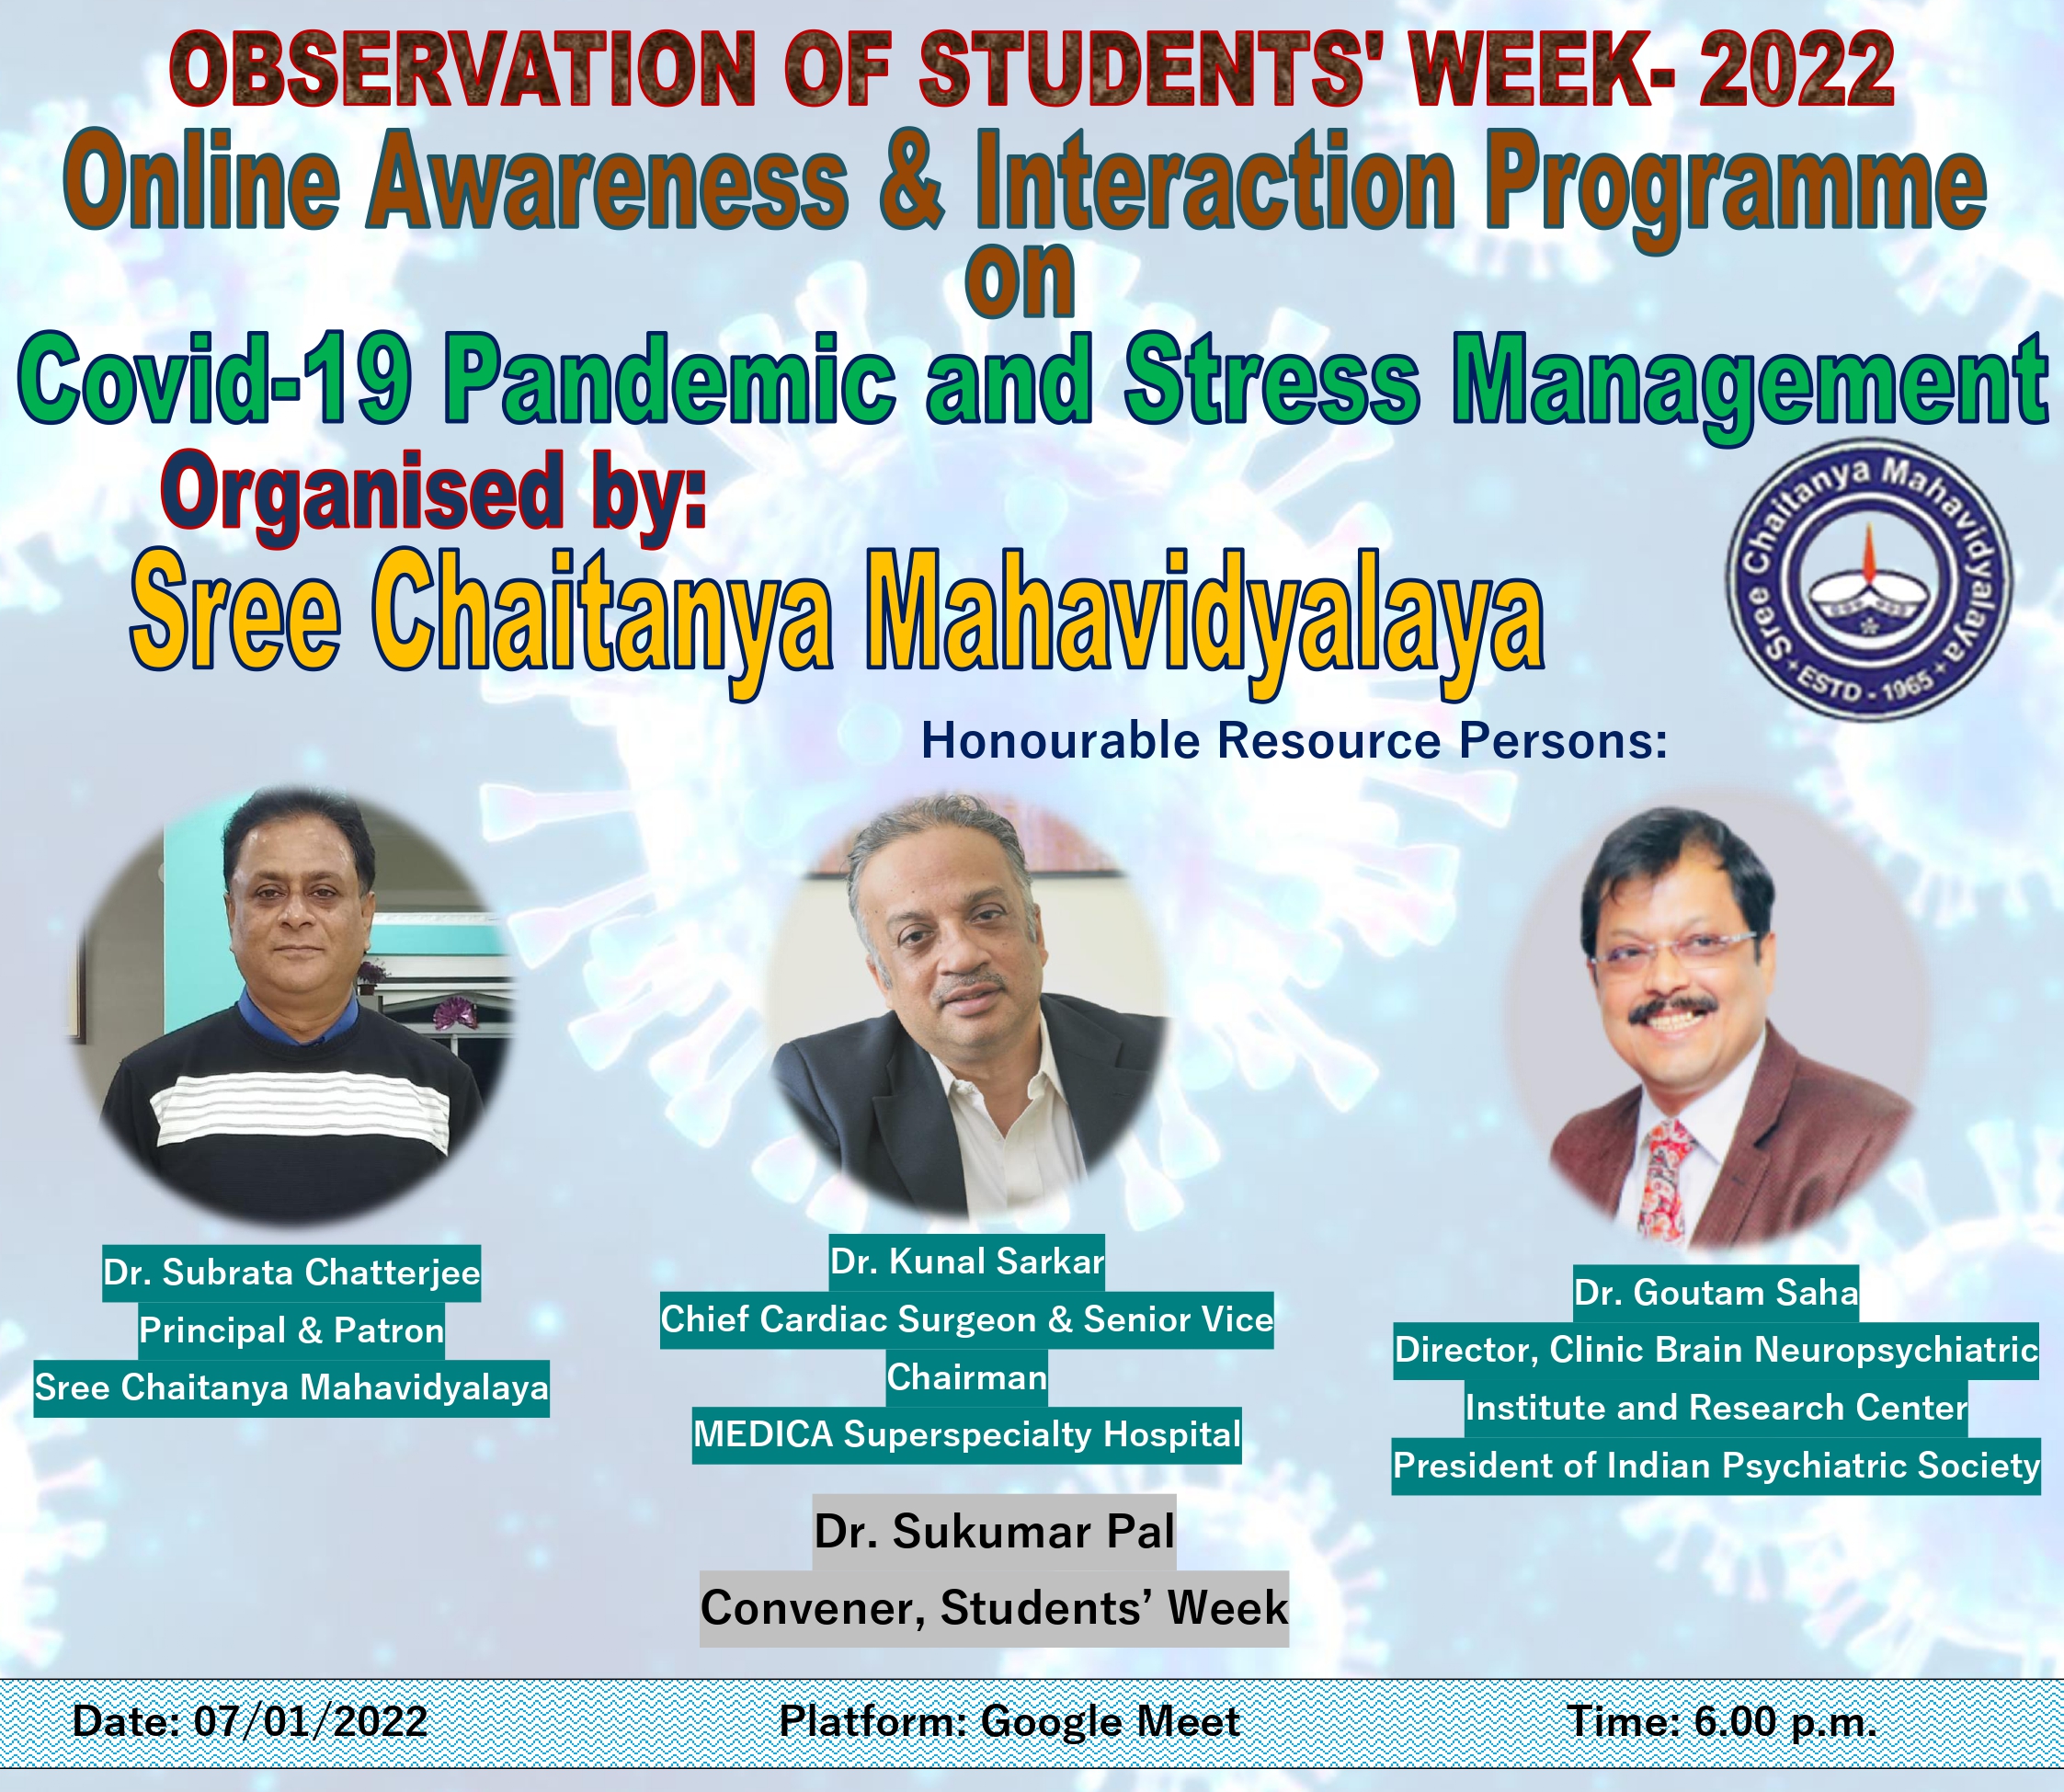 Observation of Students' Week on 